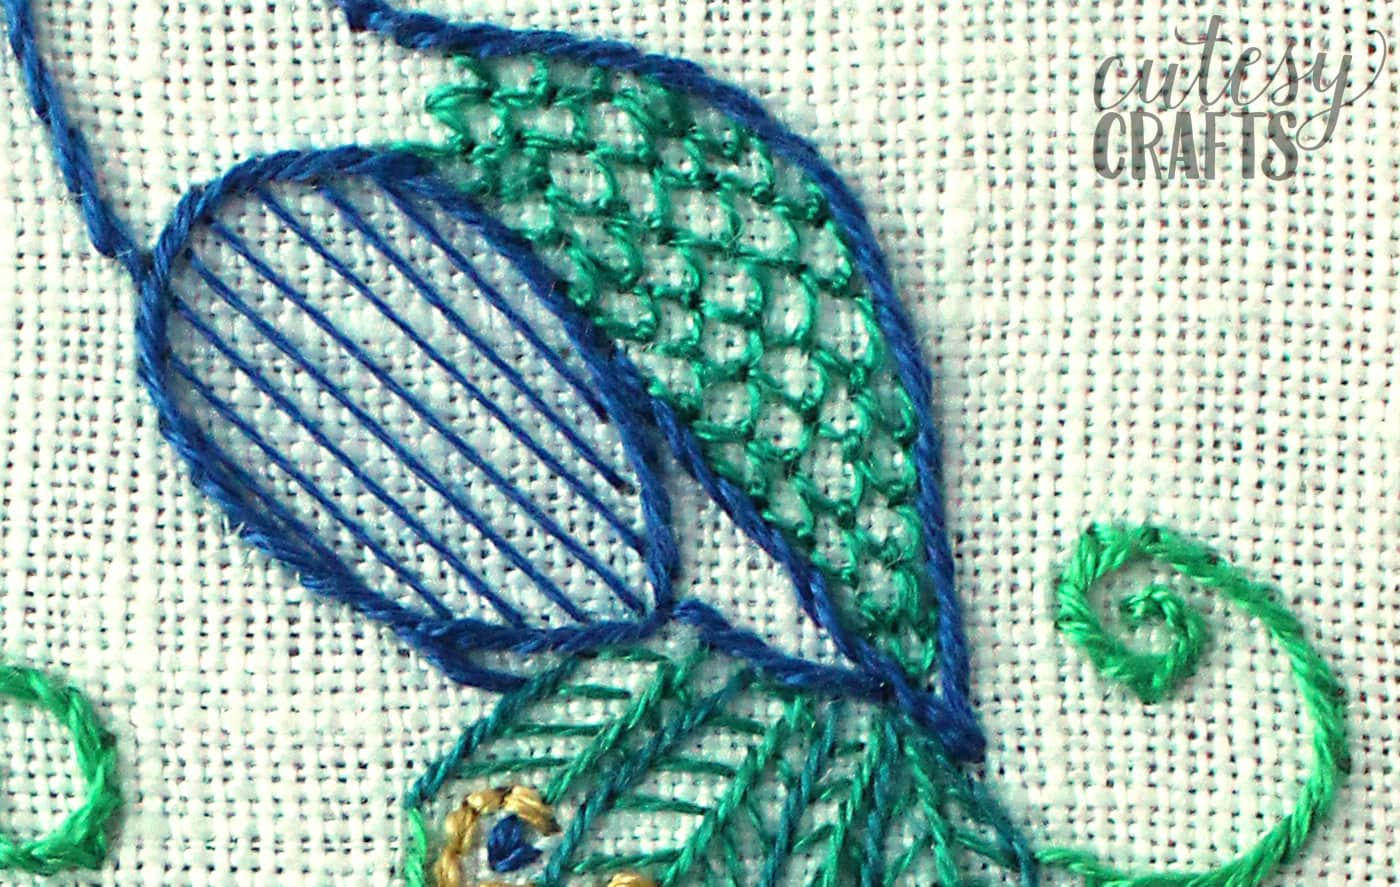 Make Your Own Embroidery Pattern Flamingo And Peacock Free Embroidery Pattern The Polka Dot Chair